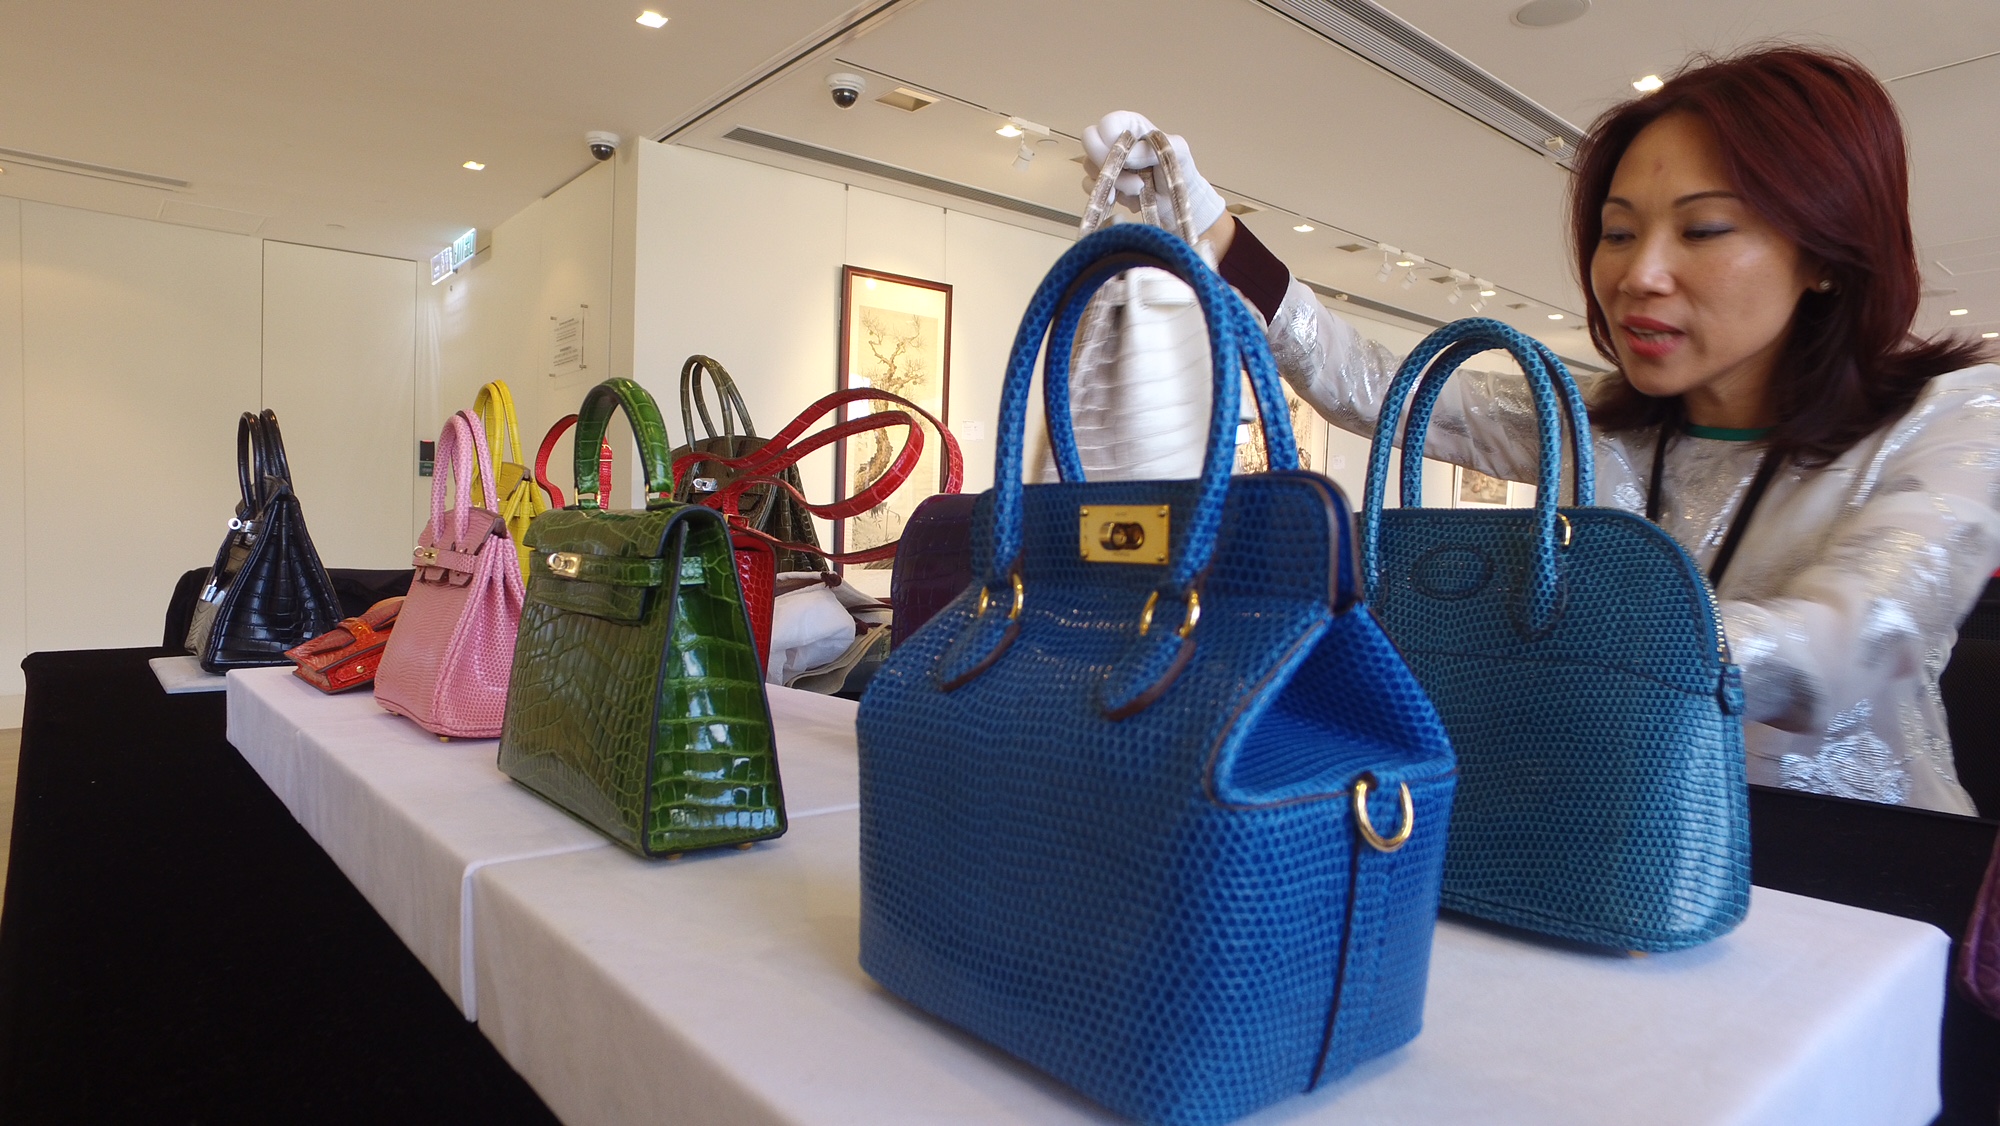 These are some of the most expensive handbags Christie's has sold